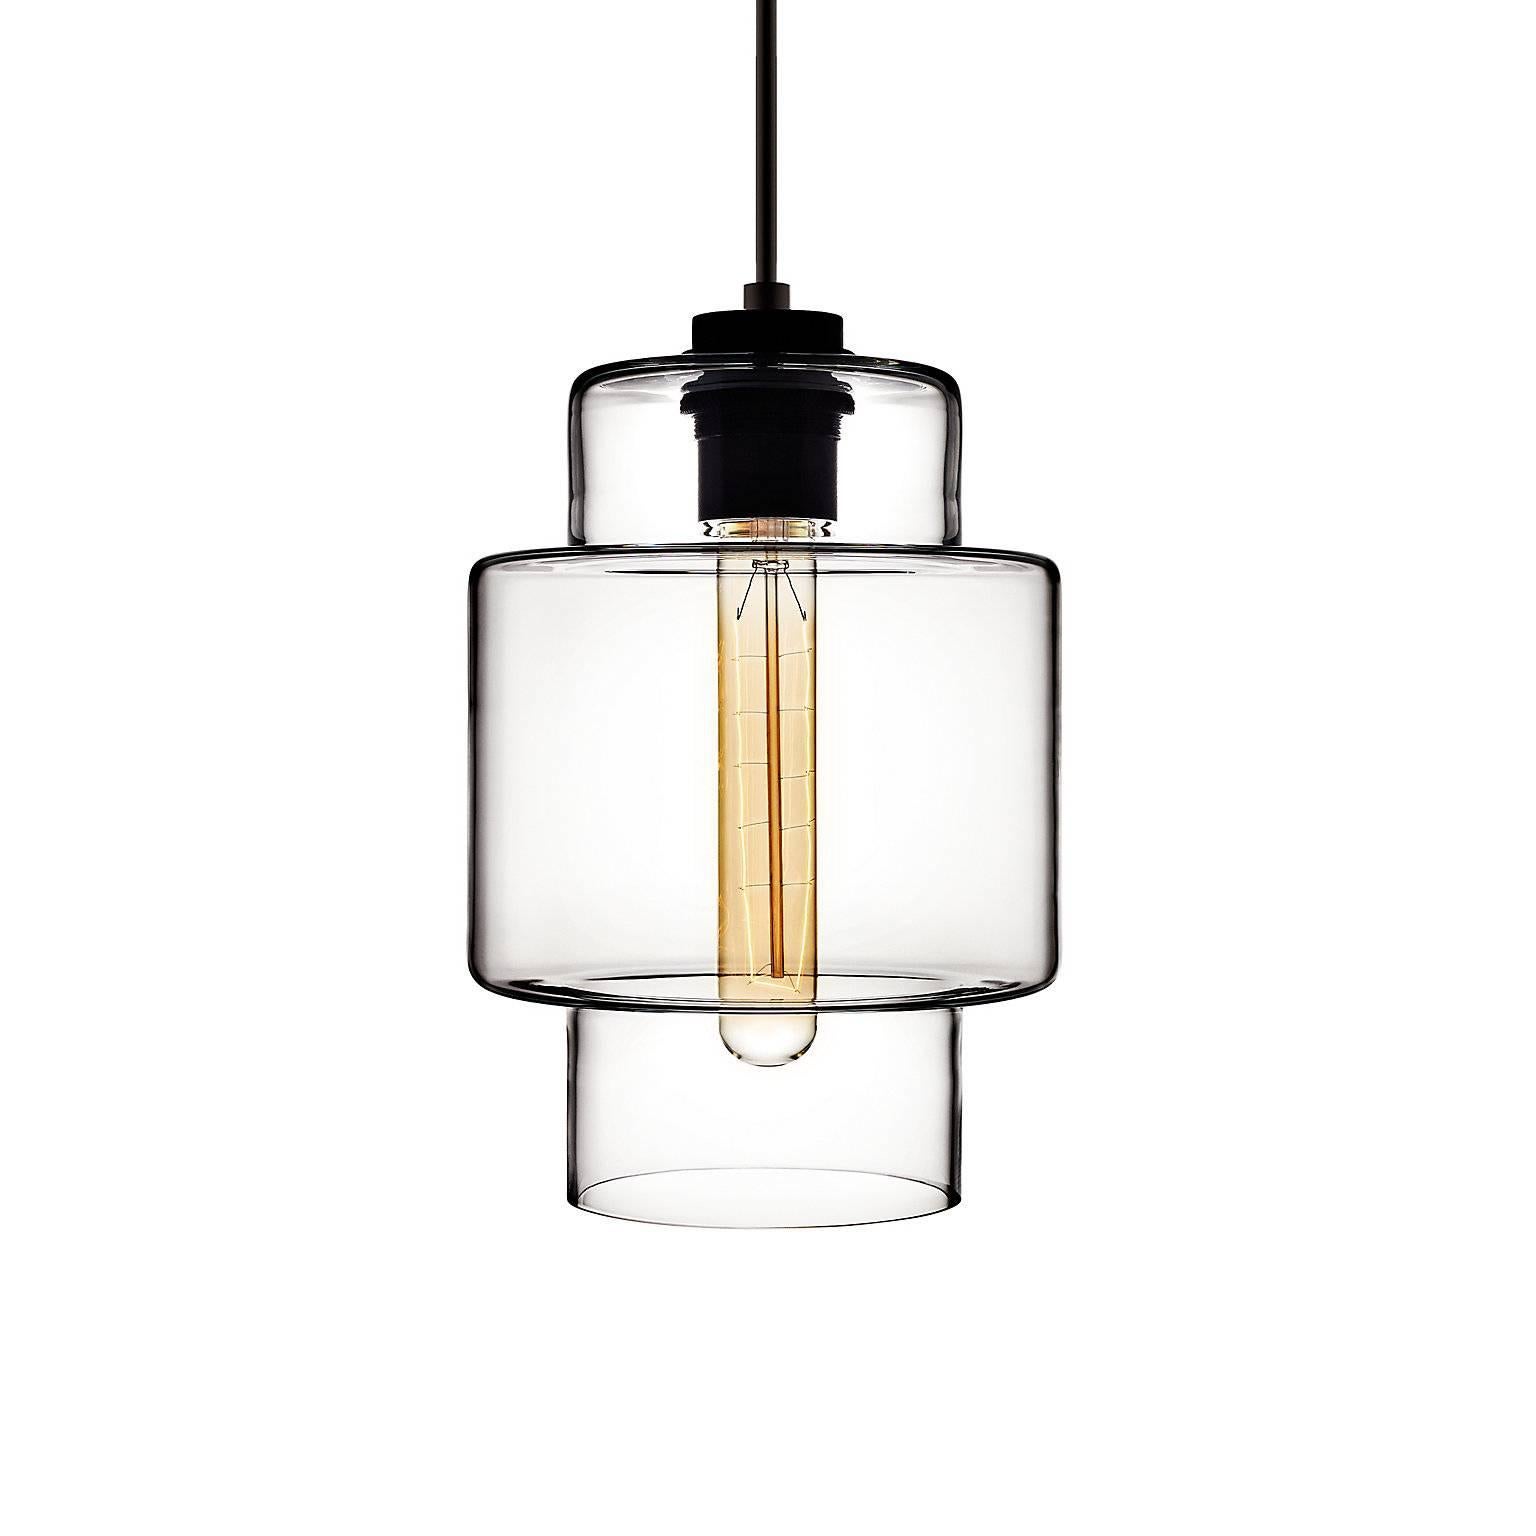 Unique to the Crystalline Series, the Axia pendant lights explore defined edges and a dynamic range of vibrant colors. Pairs easily with the Trove, Delinea, and Calla pendants that also comprise the Crystalline Series. Every single glass pendant